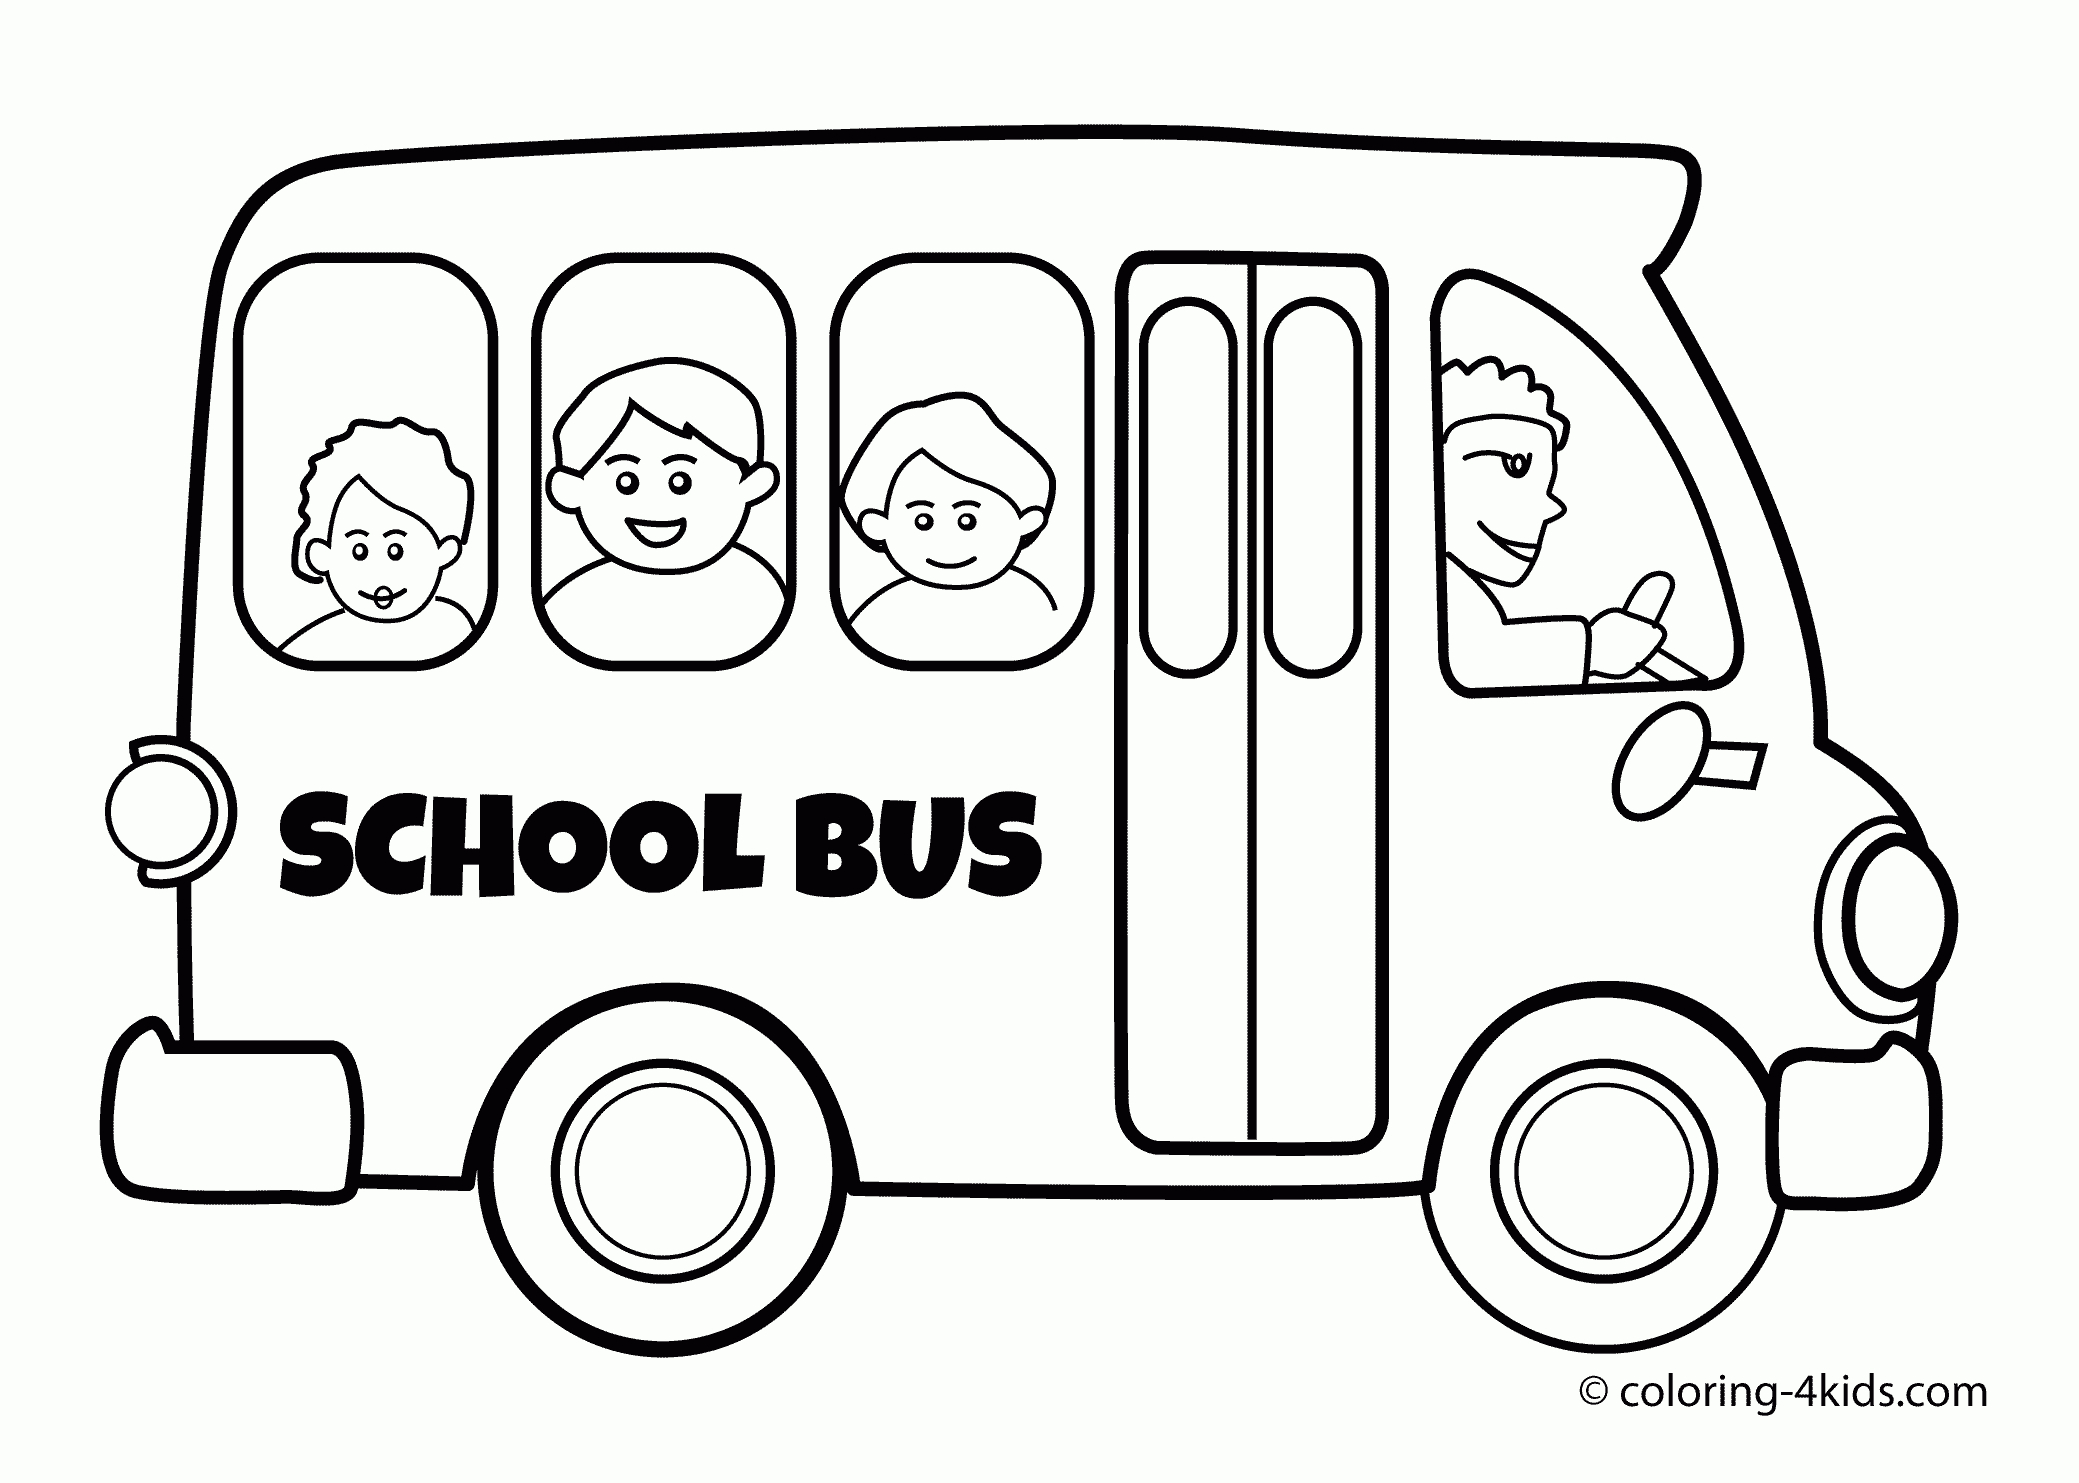 School Bus Printable Coloring Page Free Coloring Pages Free